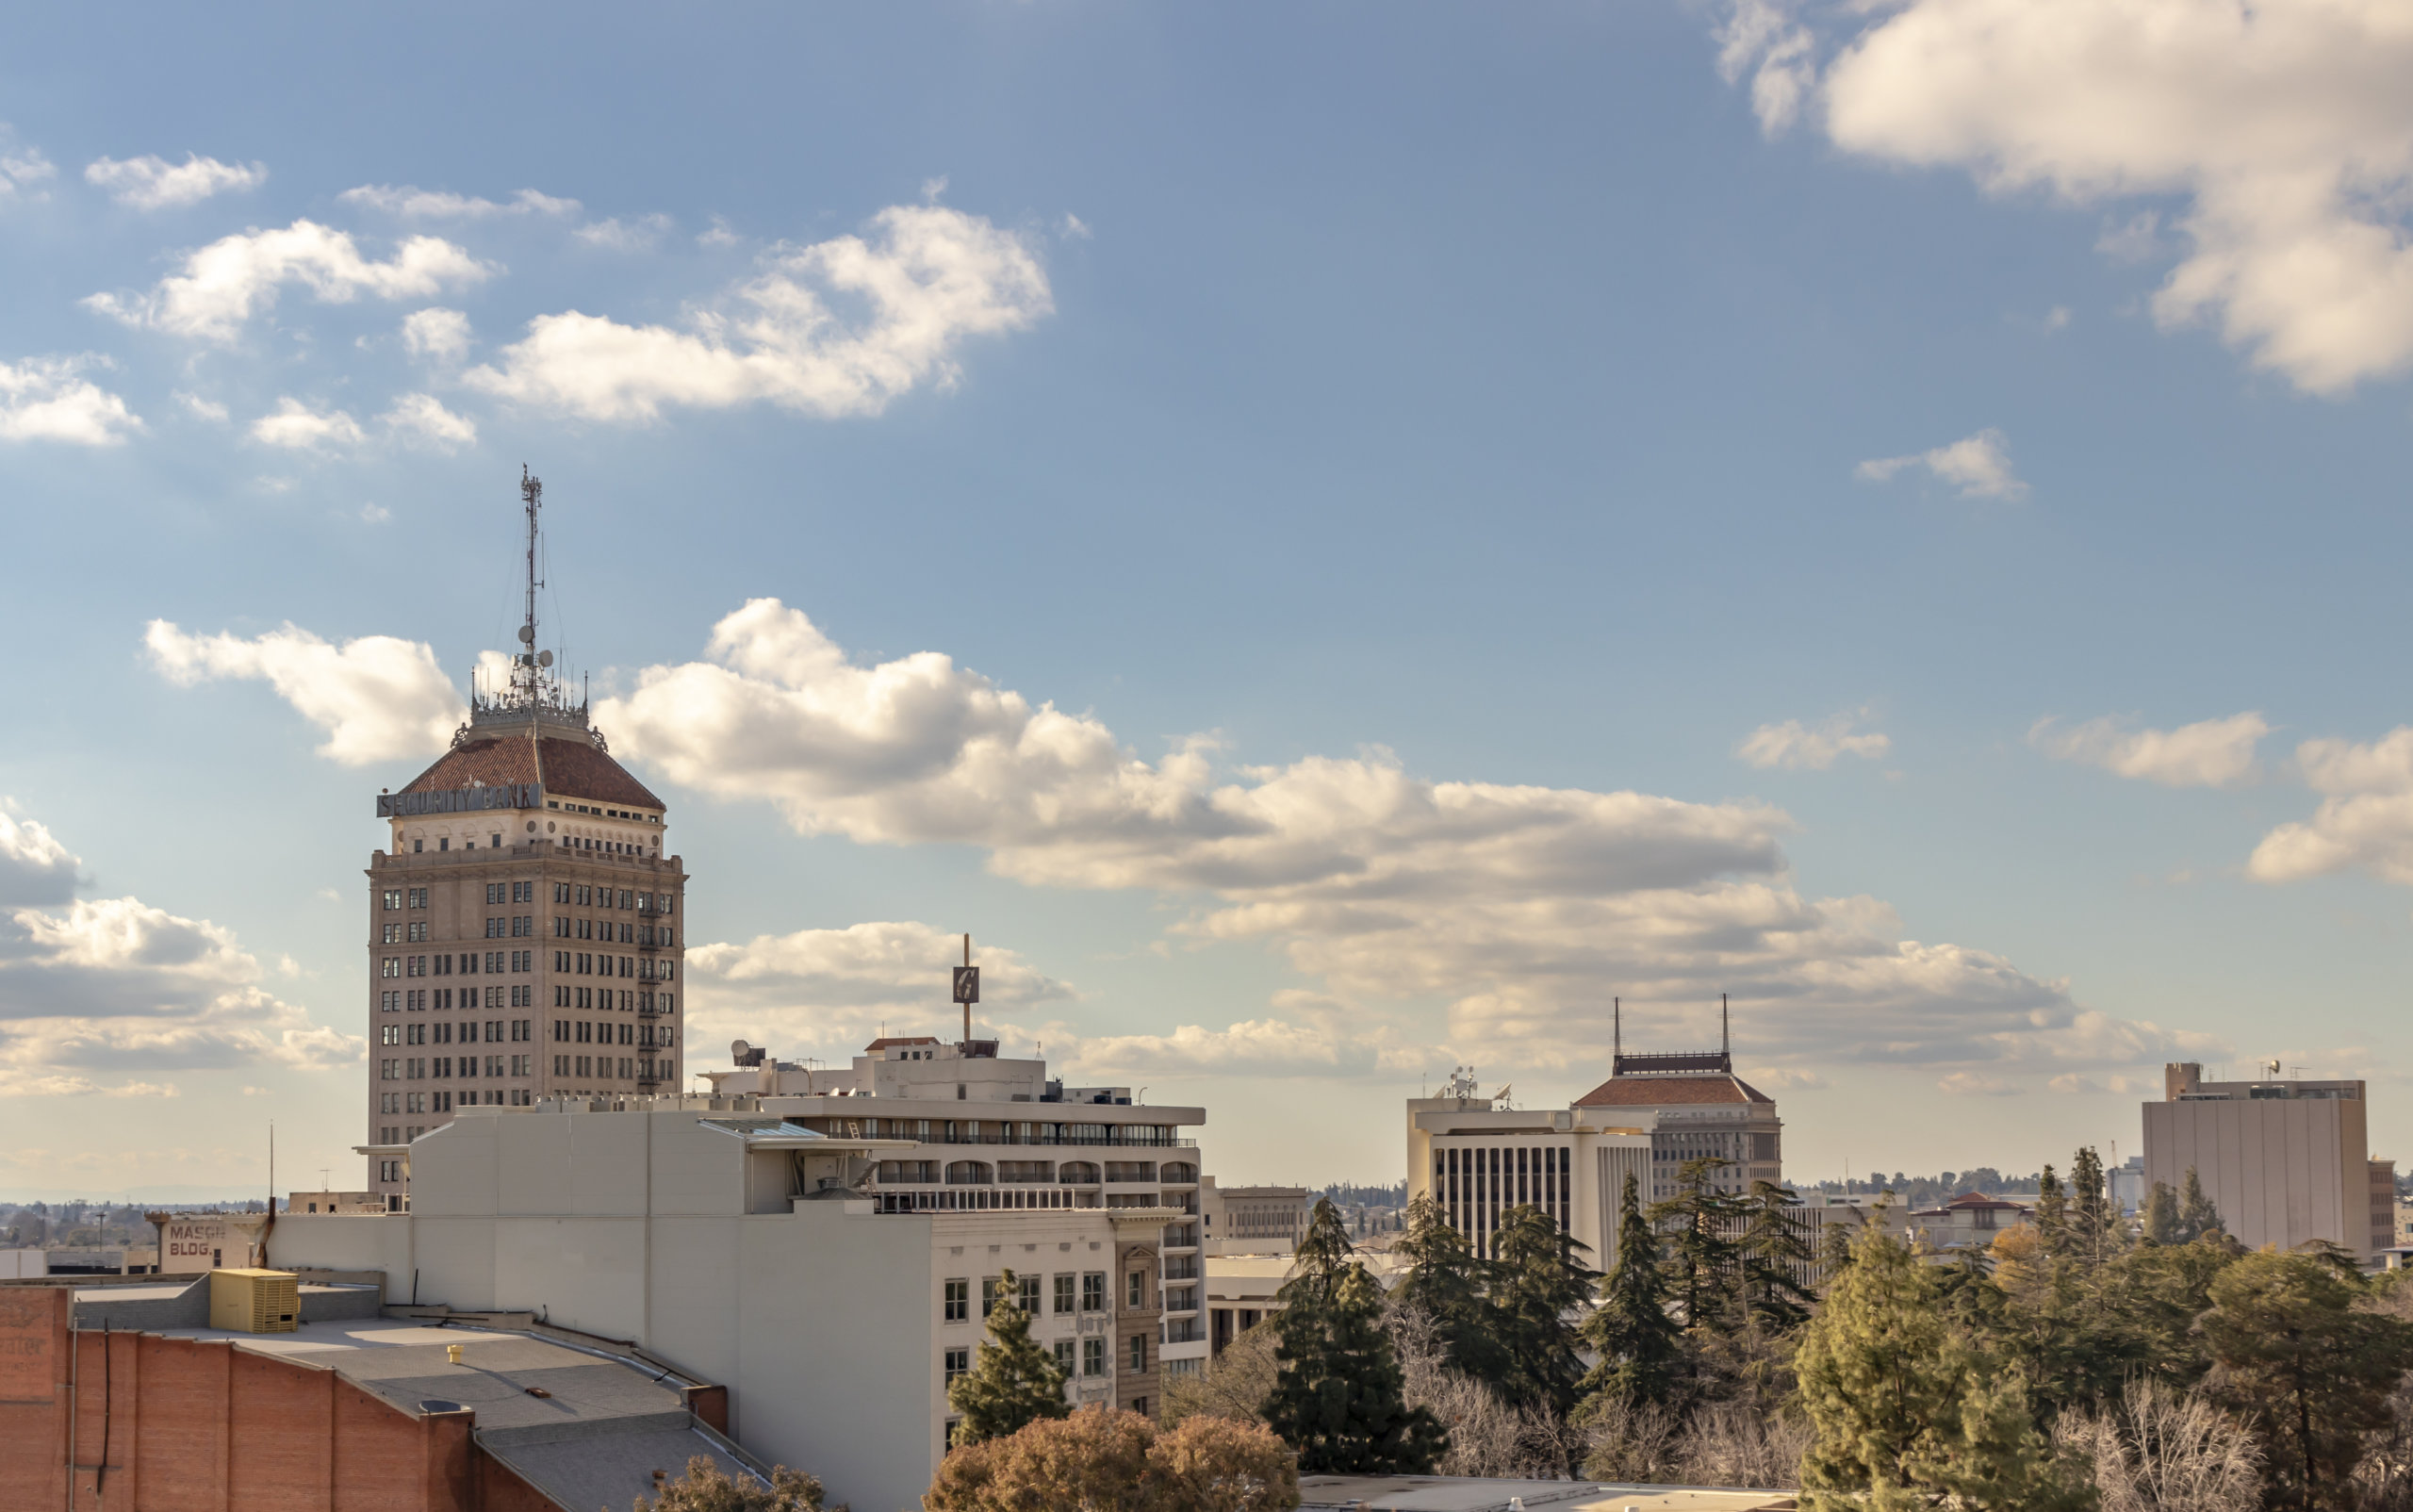 Downtown Fresno Skyline, California, USA, on a spring afternoon. CDC